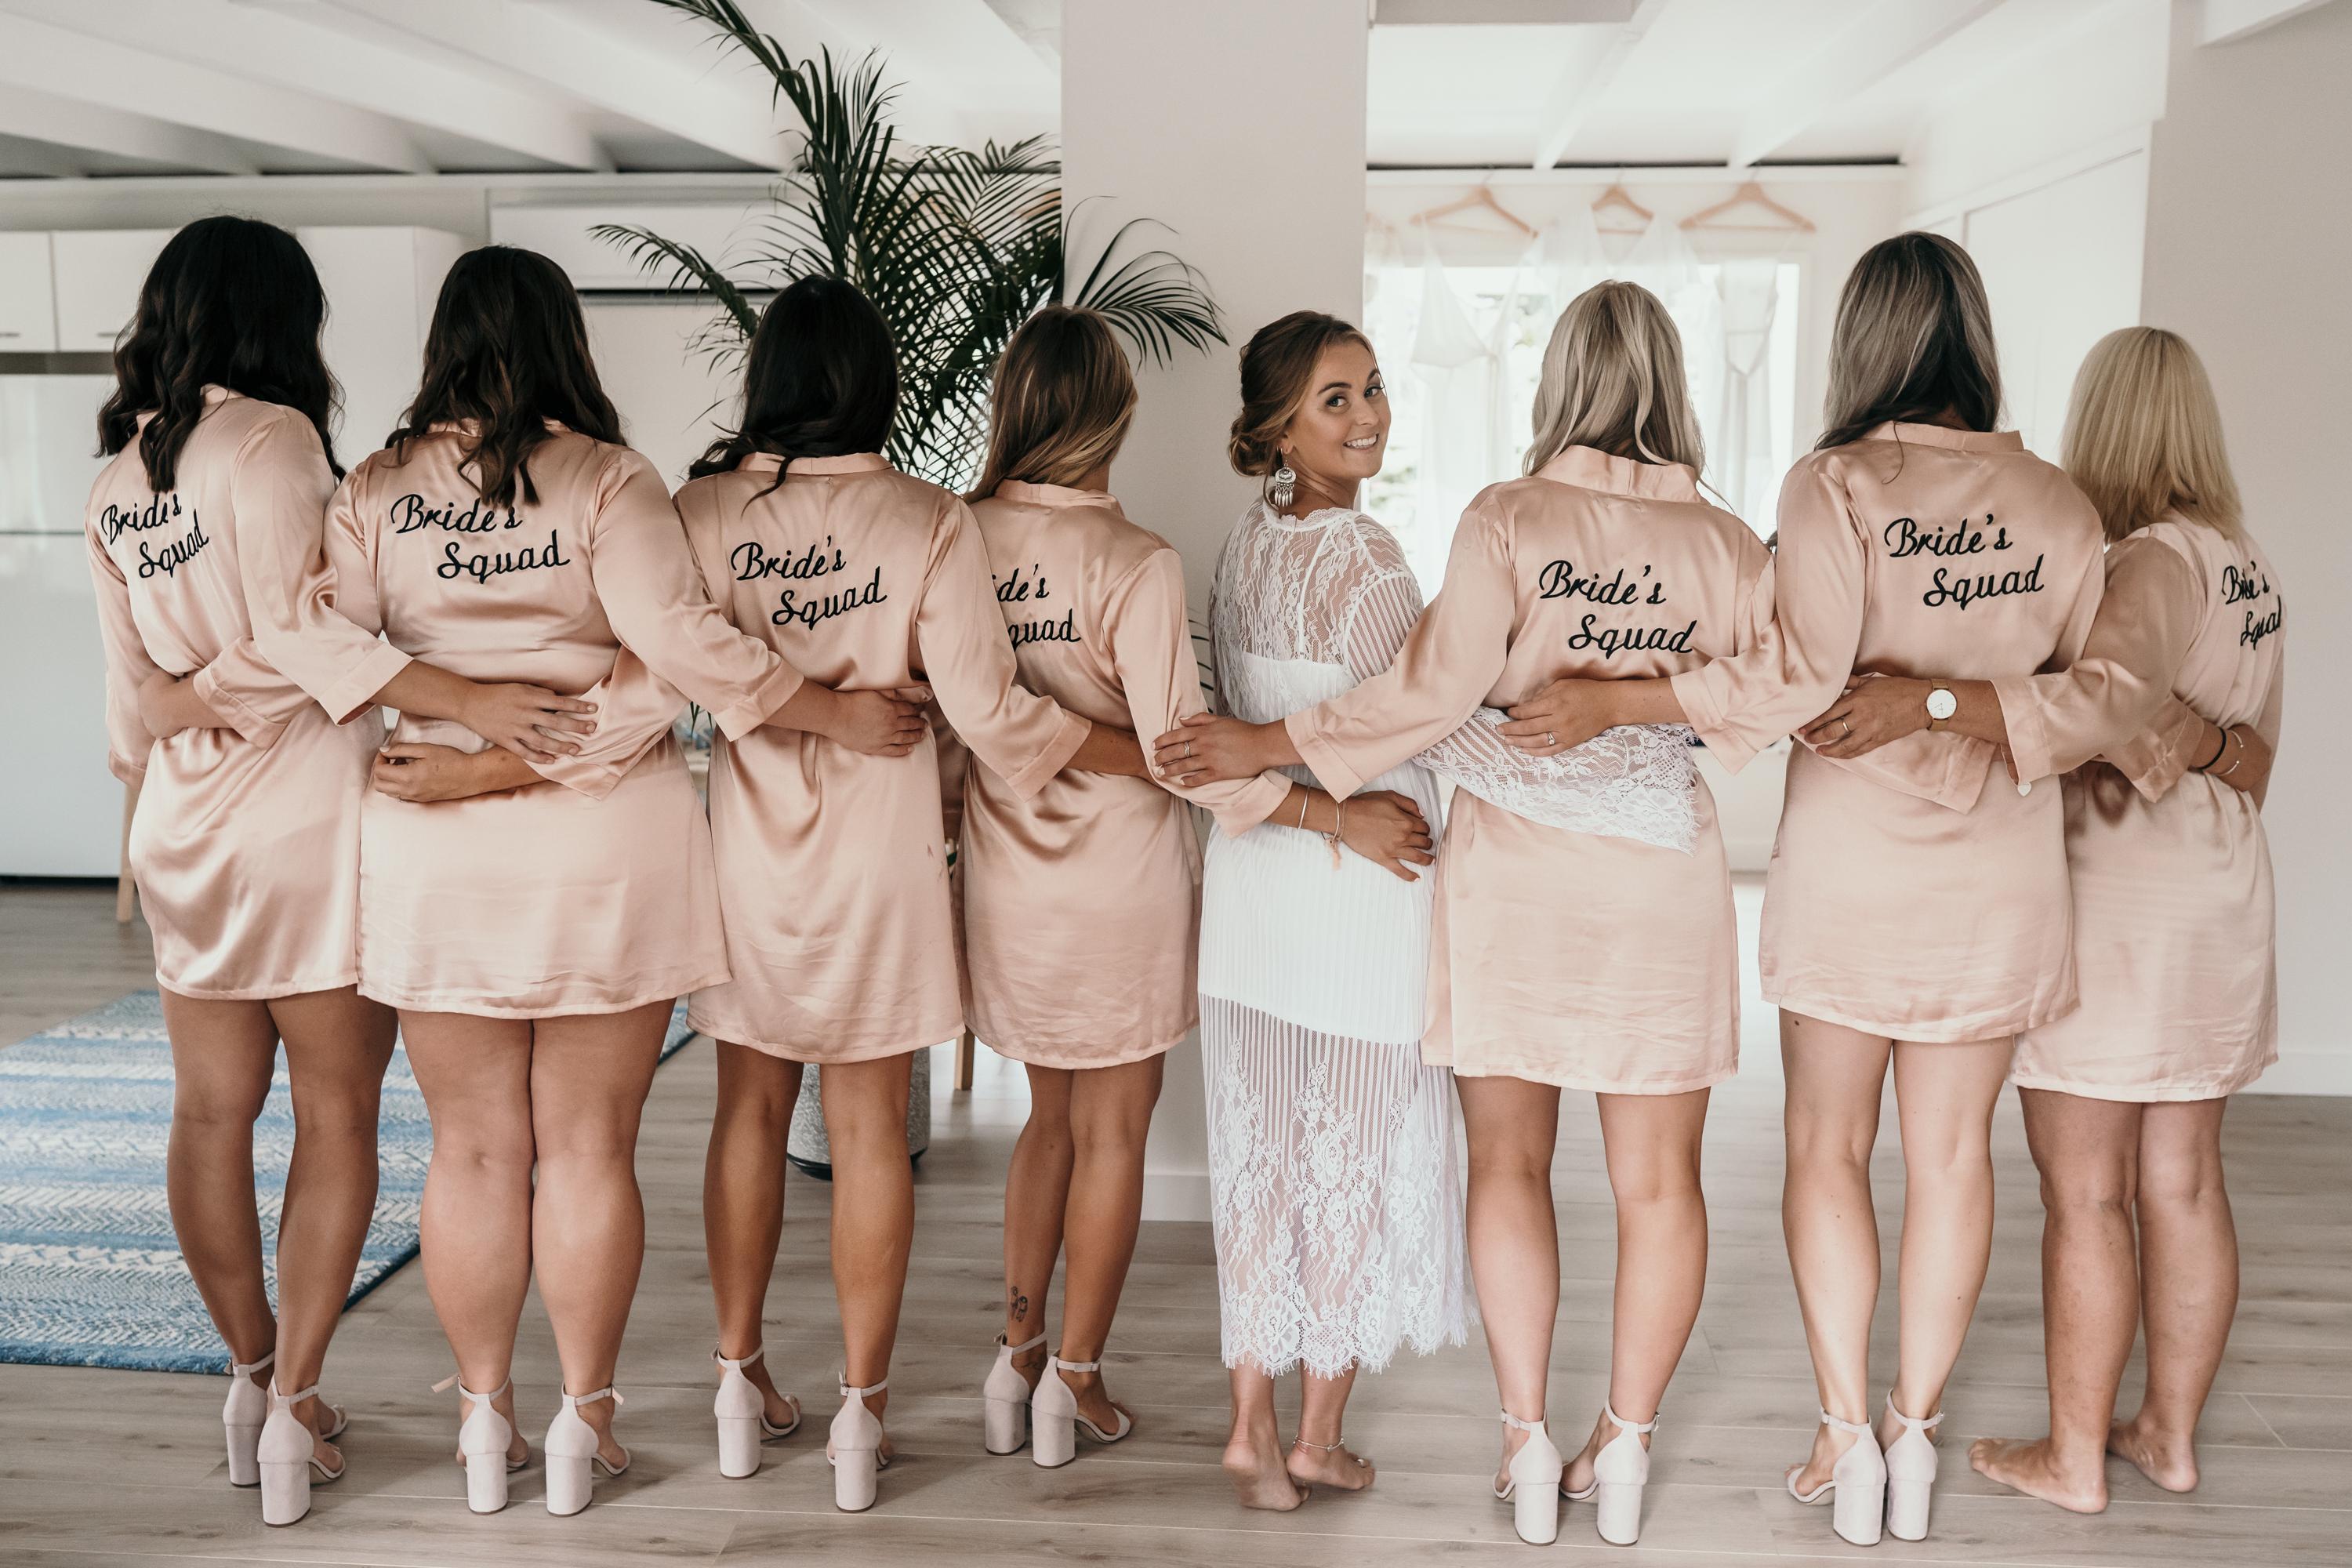 Bridal party getting ready